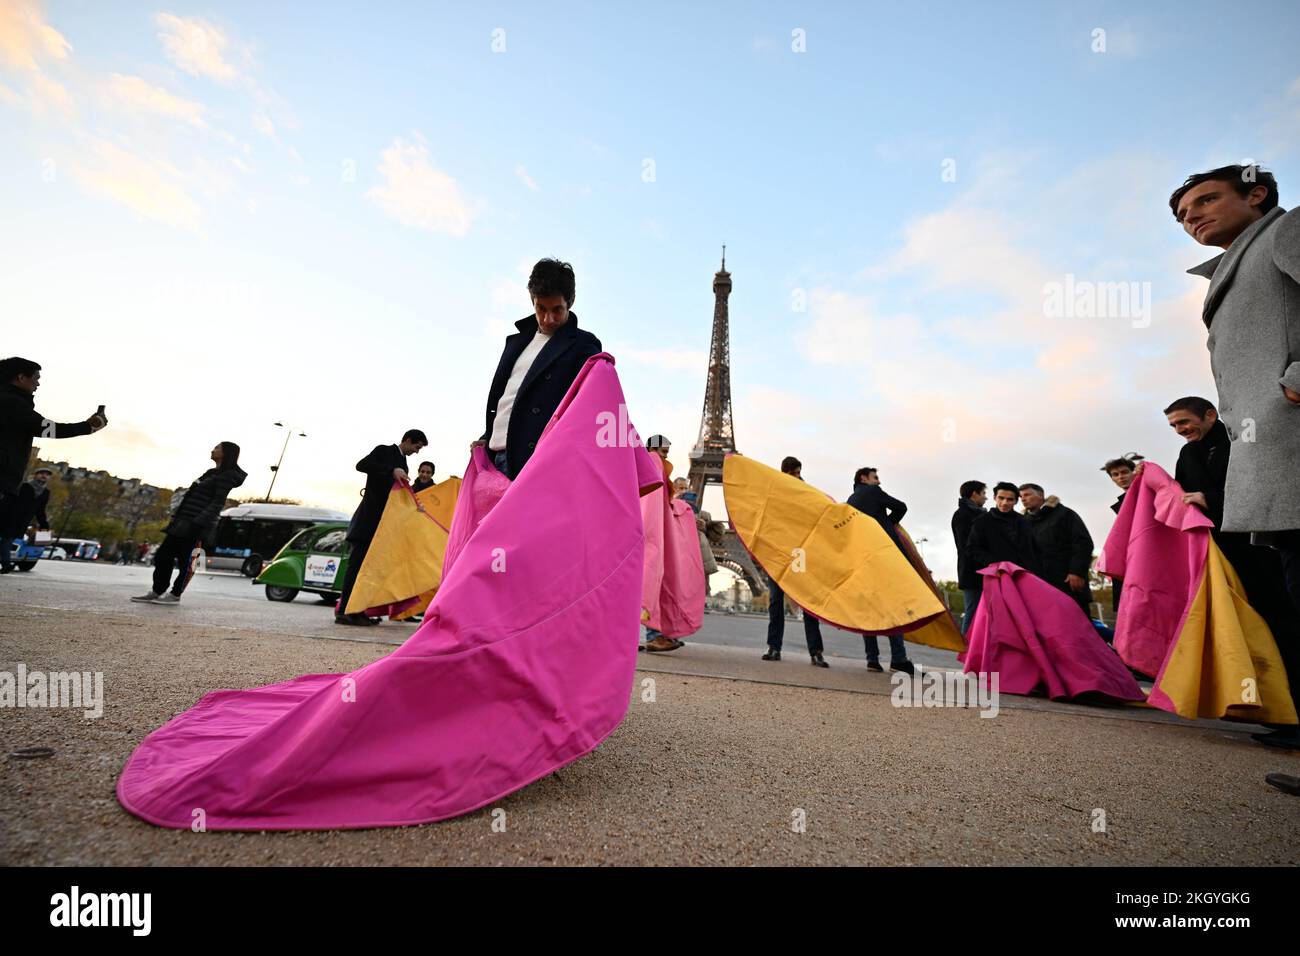 Exclusive - 13 French Bullfighters (Toreros) protesting in front of the Eiffel tower in Paris, France on November 23, 2022 as French parliament's law commission have rejected calls for a ban on bullfighting, a full vote on the issue is scheduled for 24 November, the first time the National Assembly will consider banning the traditional practice. The Bullfighters are: Marc Serrano, Julien Lescarret, Thomas Dufau, Tibo Garcia, Yannis Djenniba « El Adoureno » , Dorian Canton, Adrien Salenc, Rafi Raucoule « El Rafi », Maxime Solera, Carlos Olsina, Jean-Baptiste Molas, Solal Calmet « Solalito », Ni Stock Photo